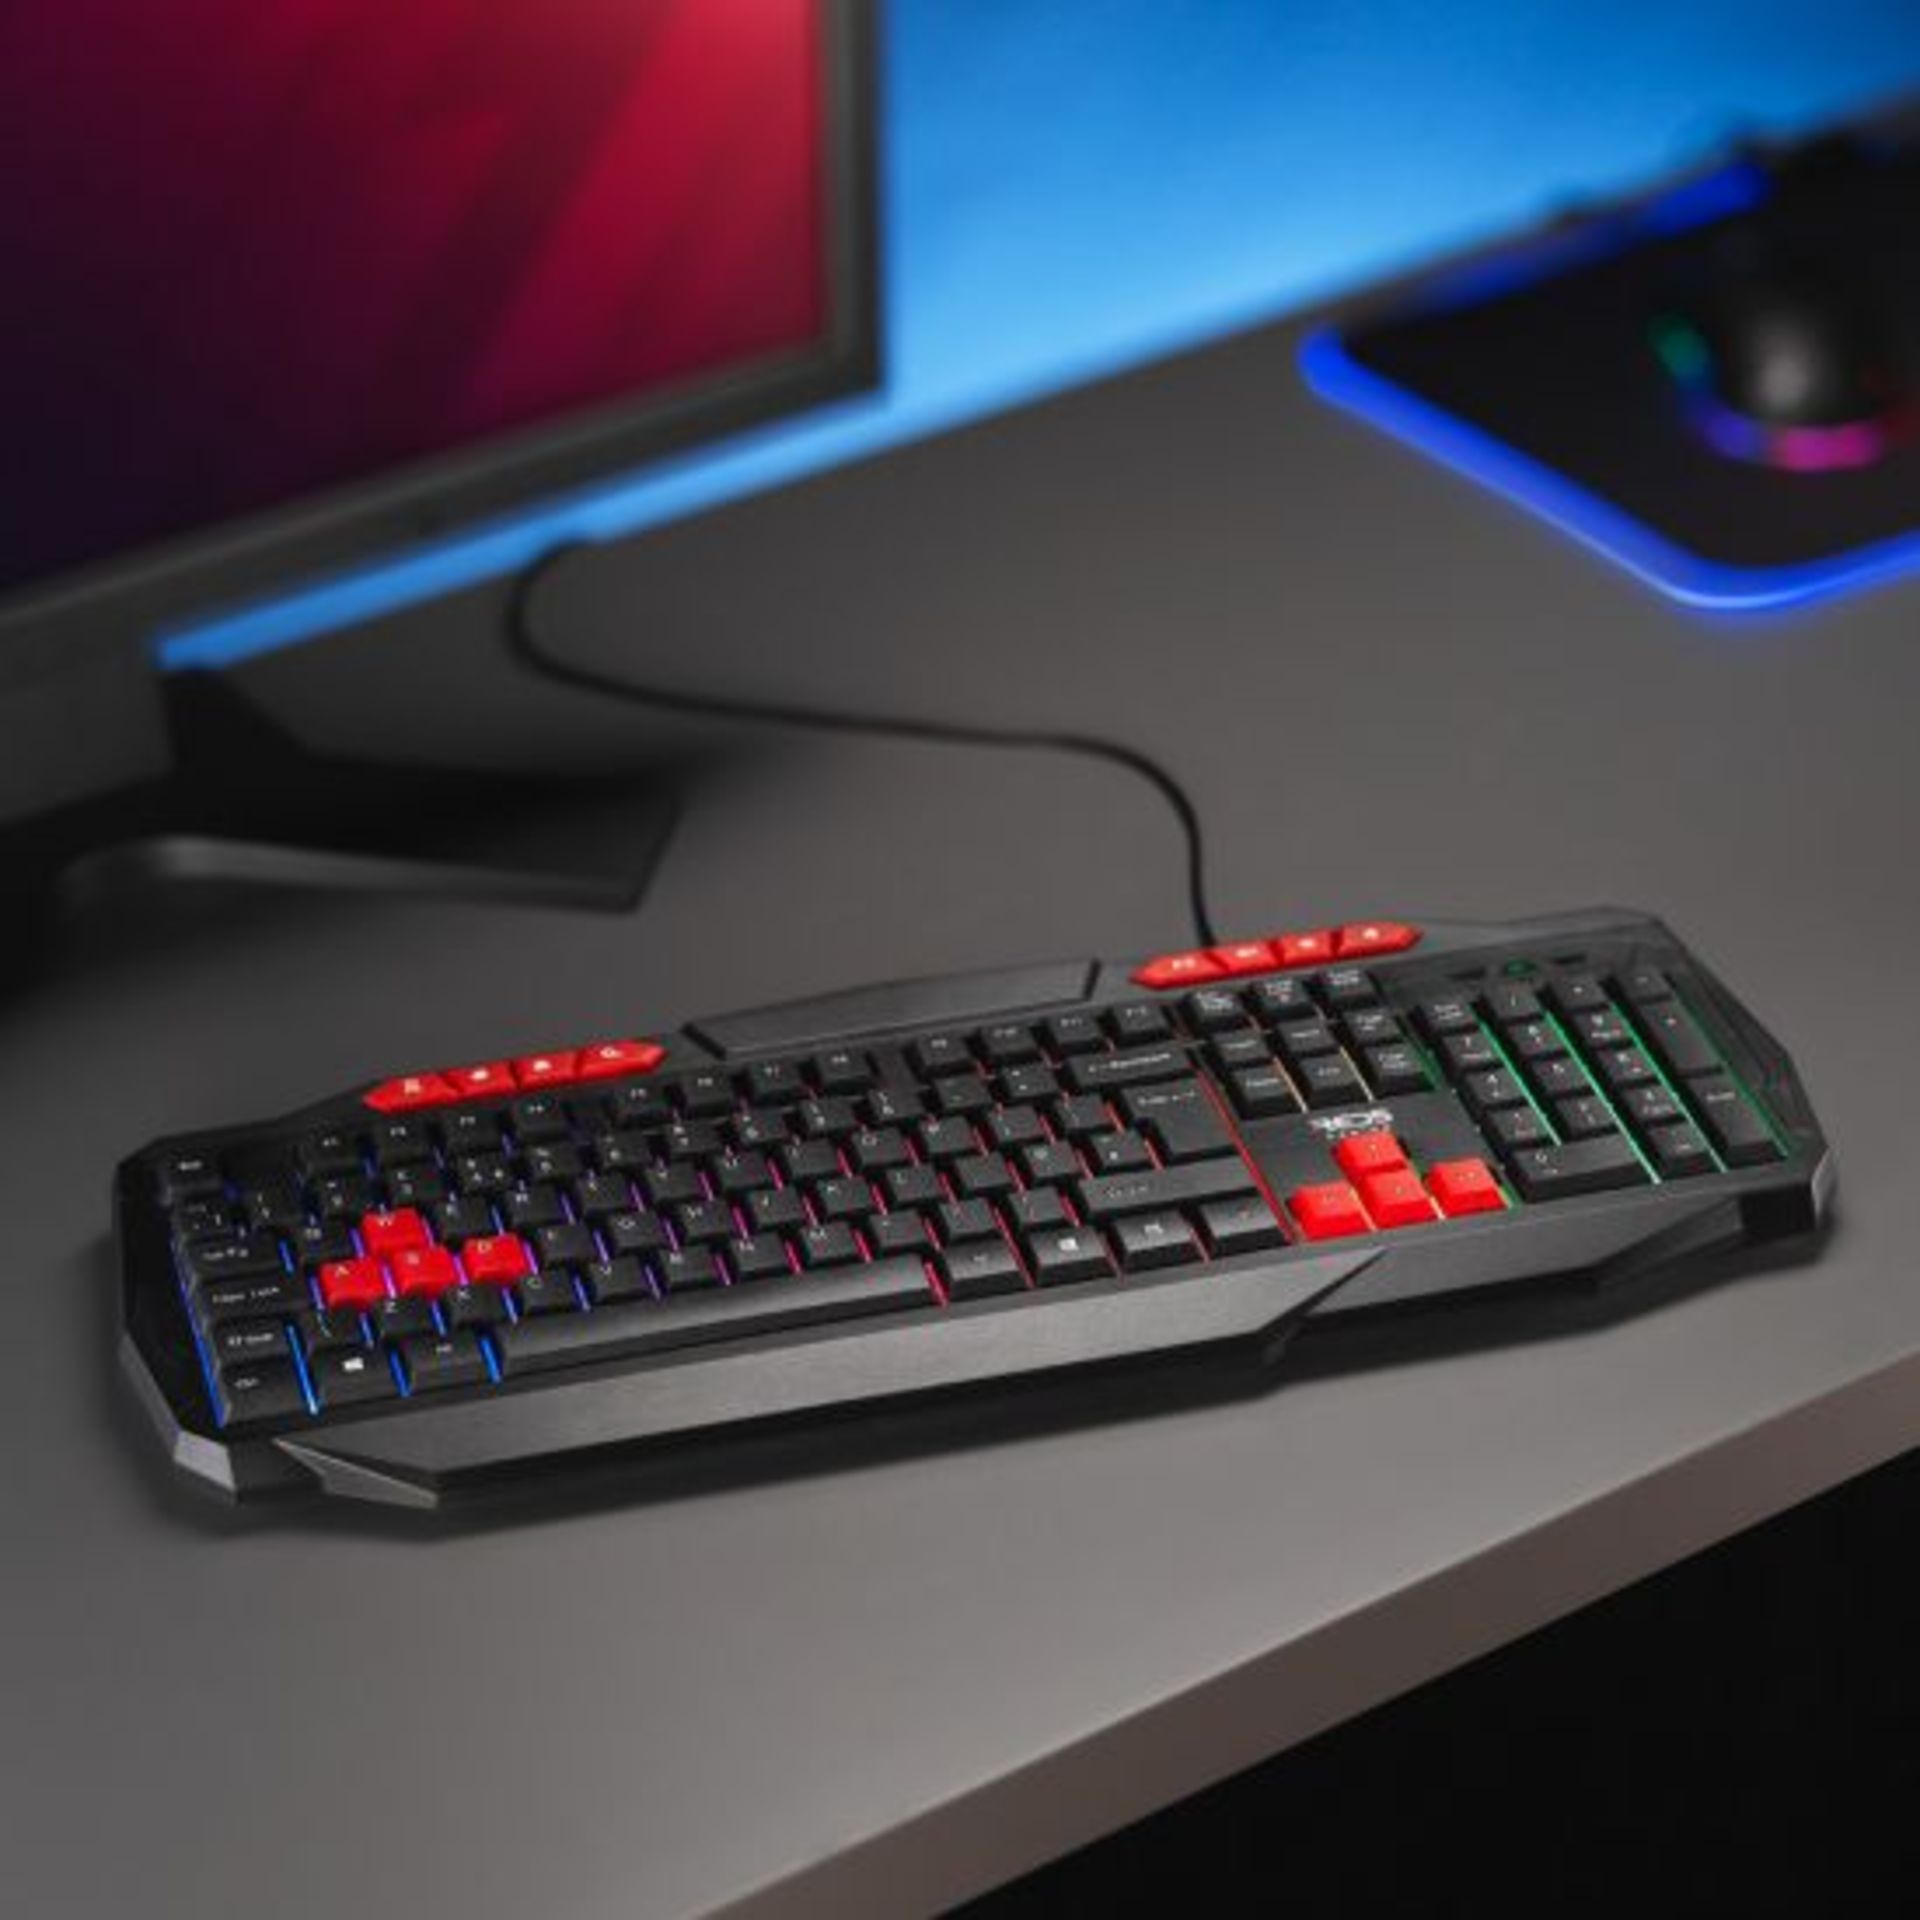 (6D) 8x Items. 6x Red5 Light Up Gaming Keyboard. 1x Red5 Orbit Light Up Gaming Keyboard. 1x Trust...